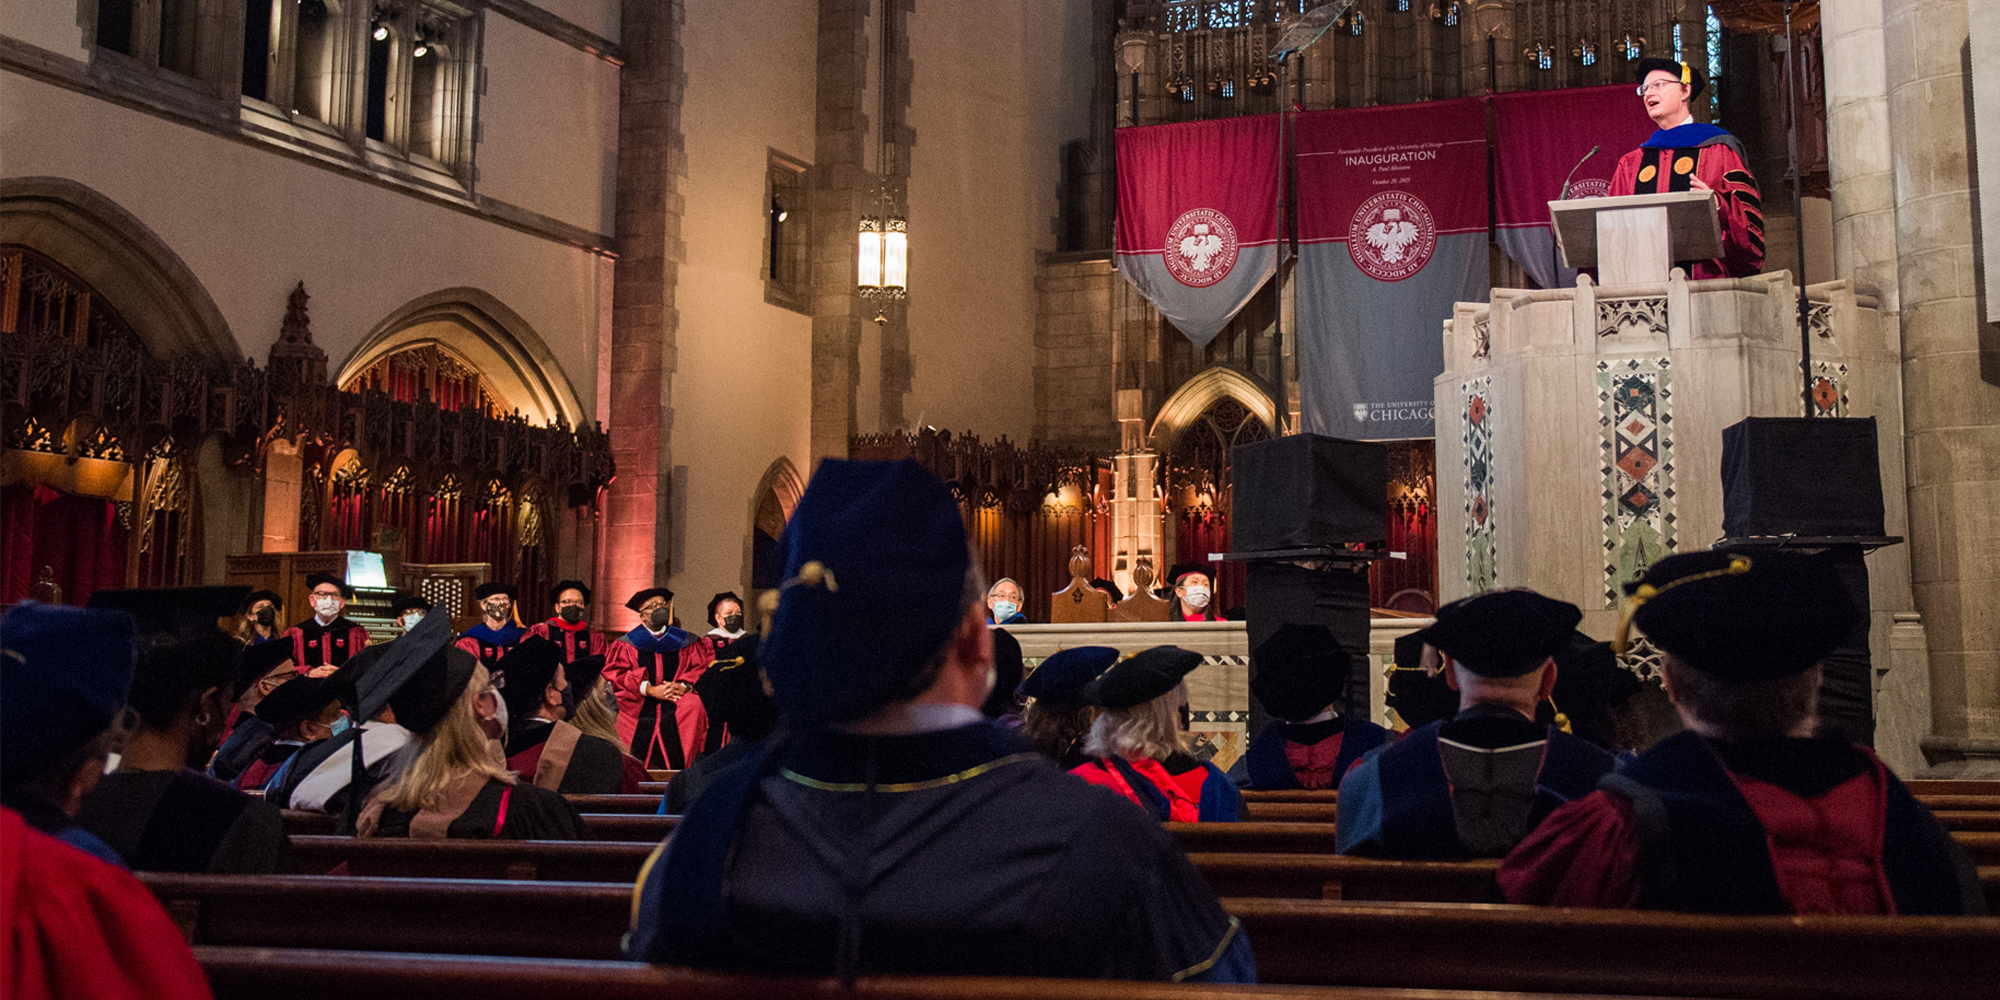 Paul Alivisatos, AB’81, at Rockefeller Chapel during the 535th Convocation